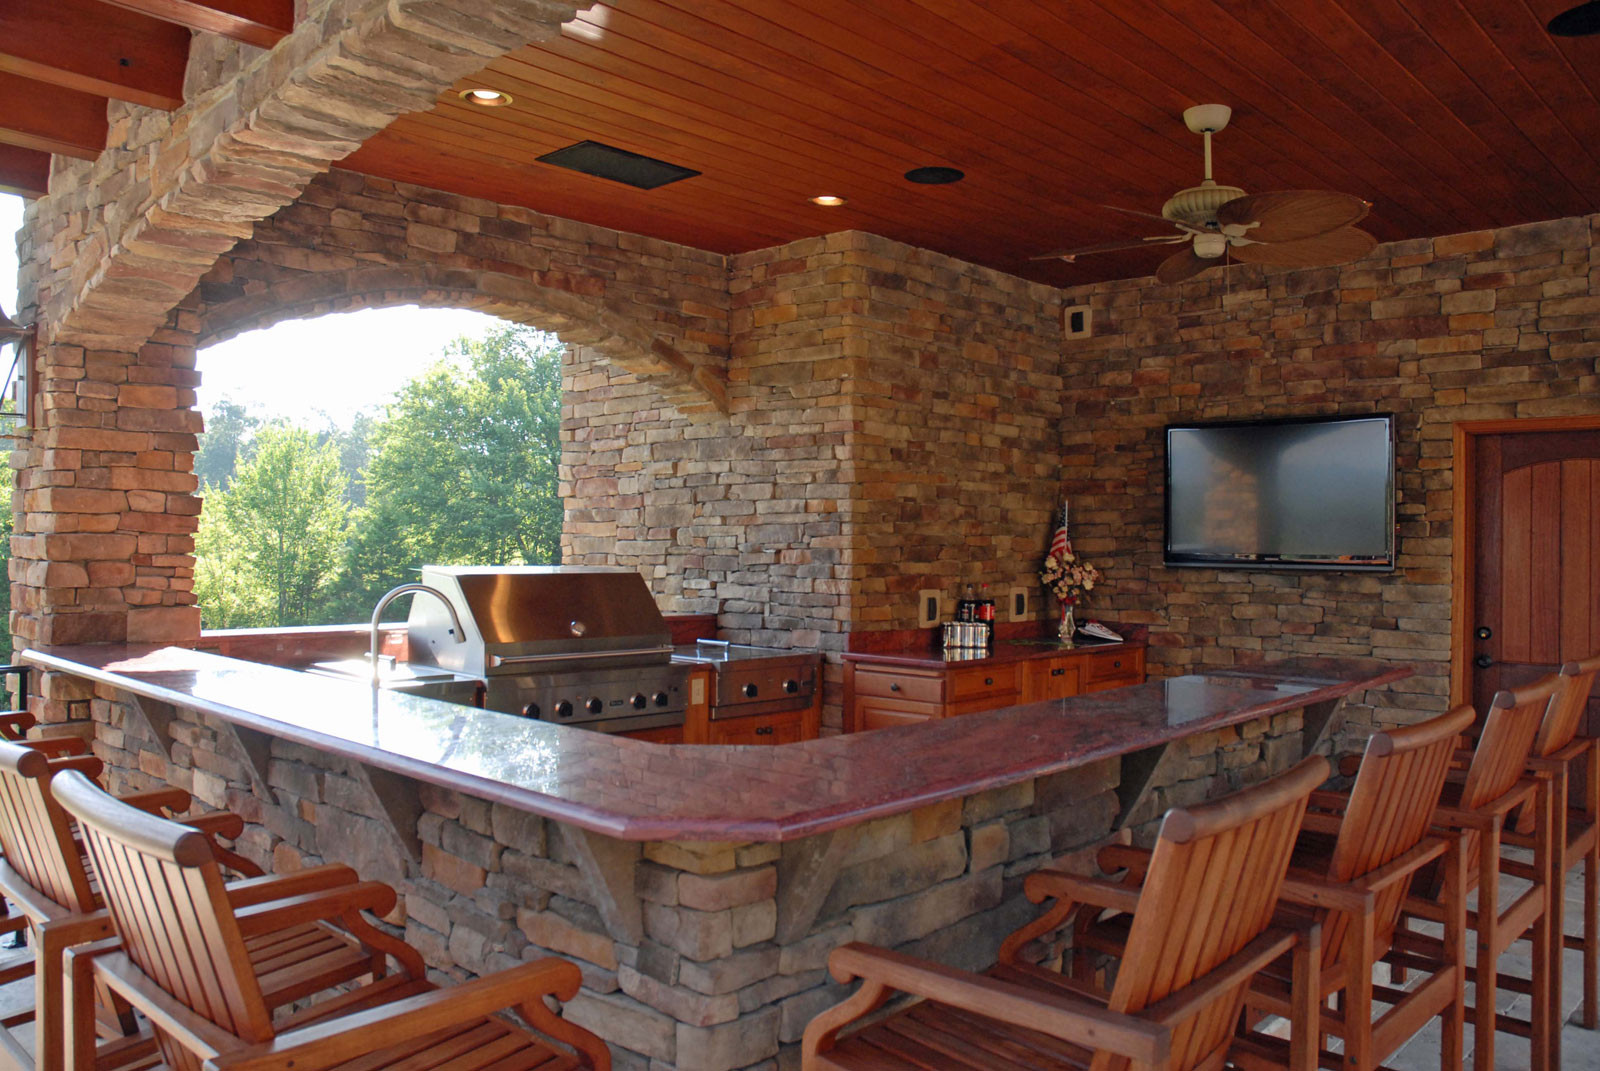 Covered Outdoor Kitchen Plans
 Outdoor Kitchen Designs with Uncovered and Covered Style